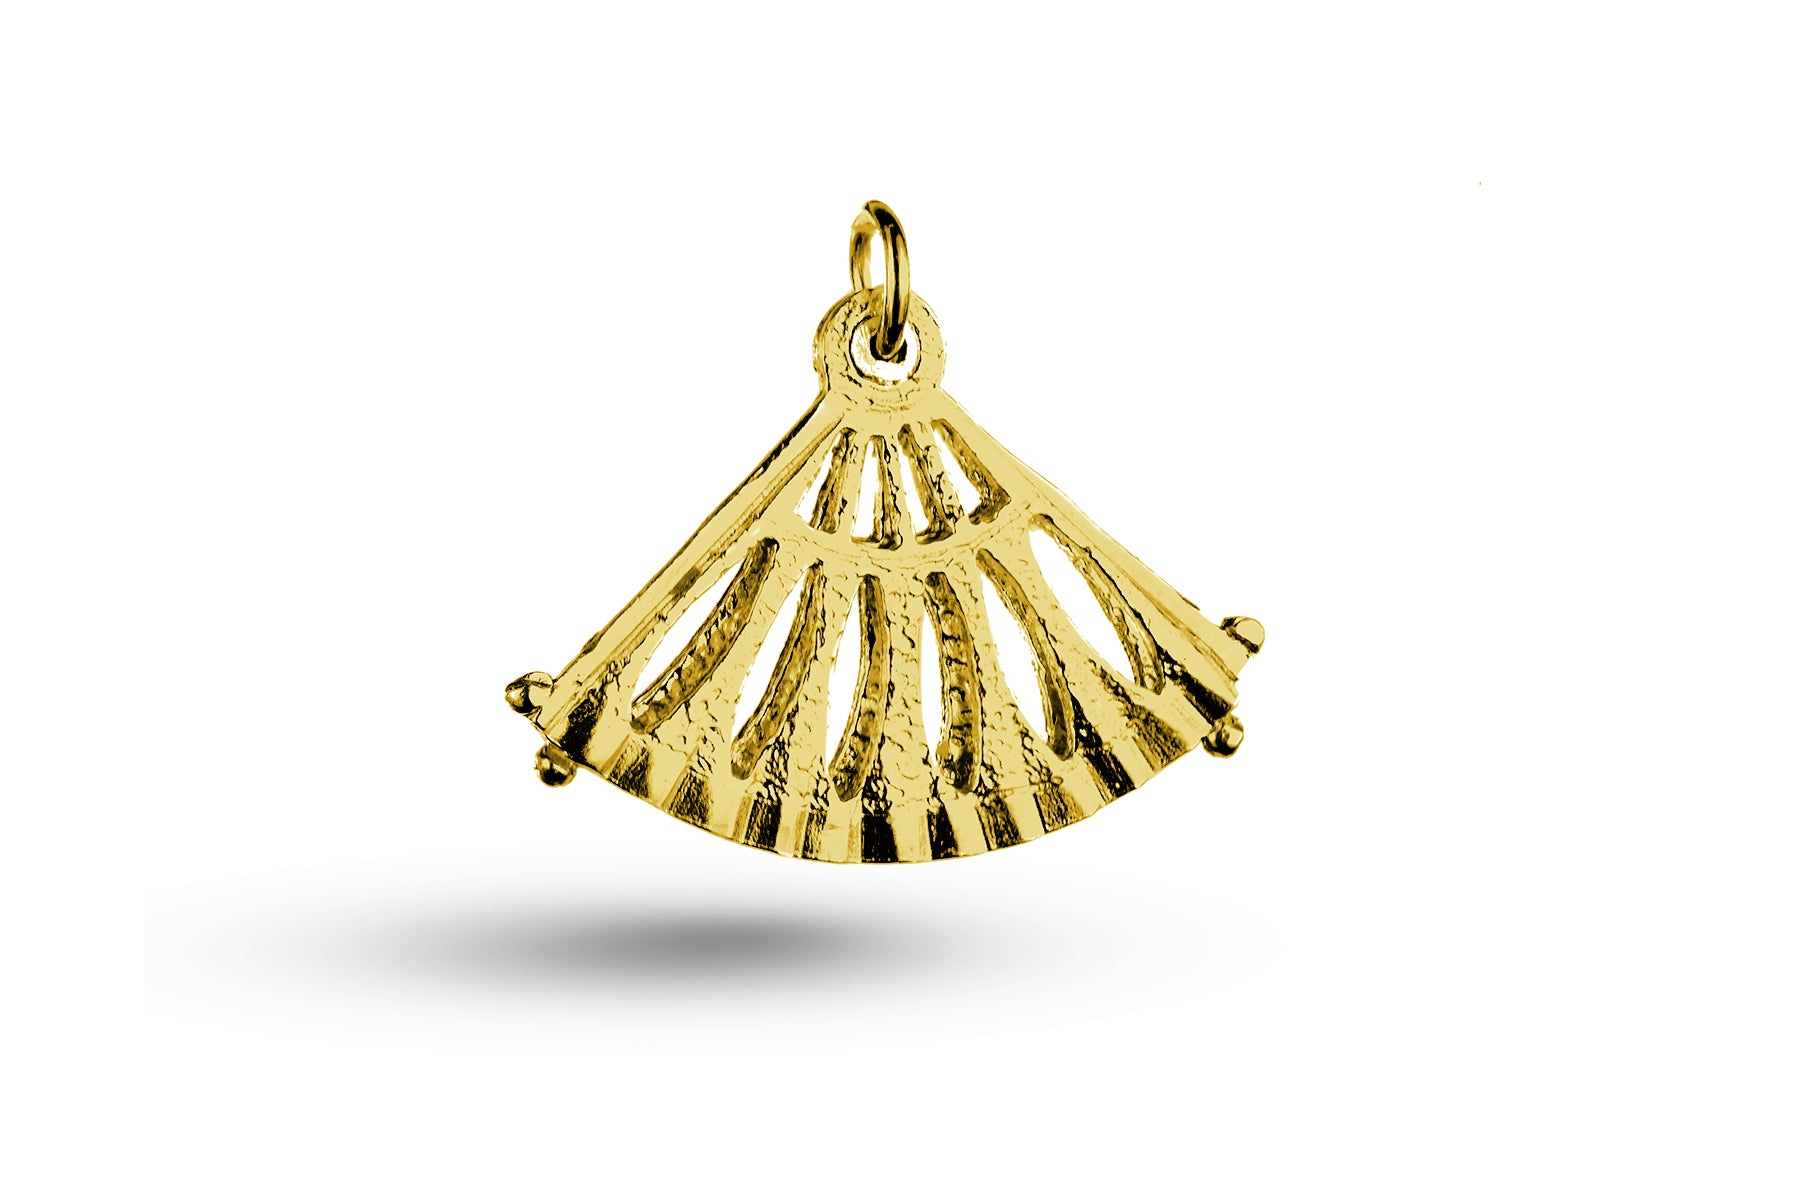 Yellow gold Collapsible Ladies Fan charm.